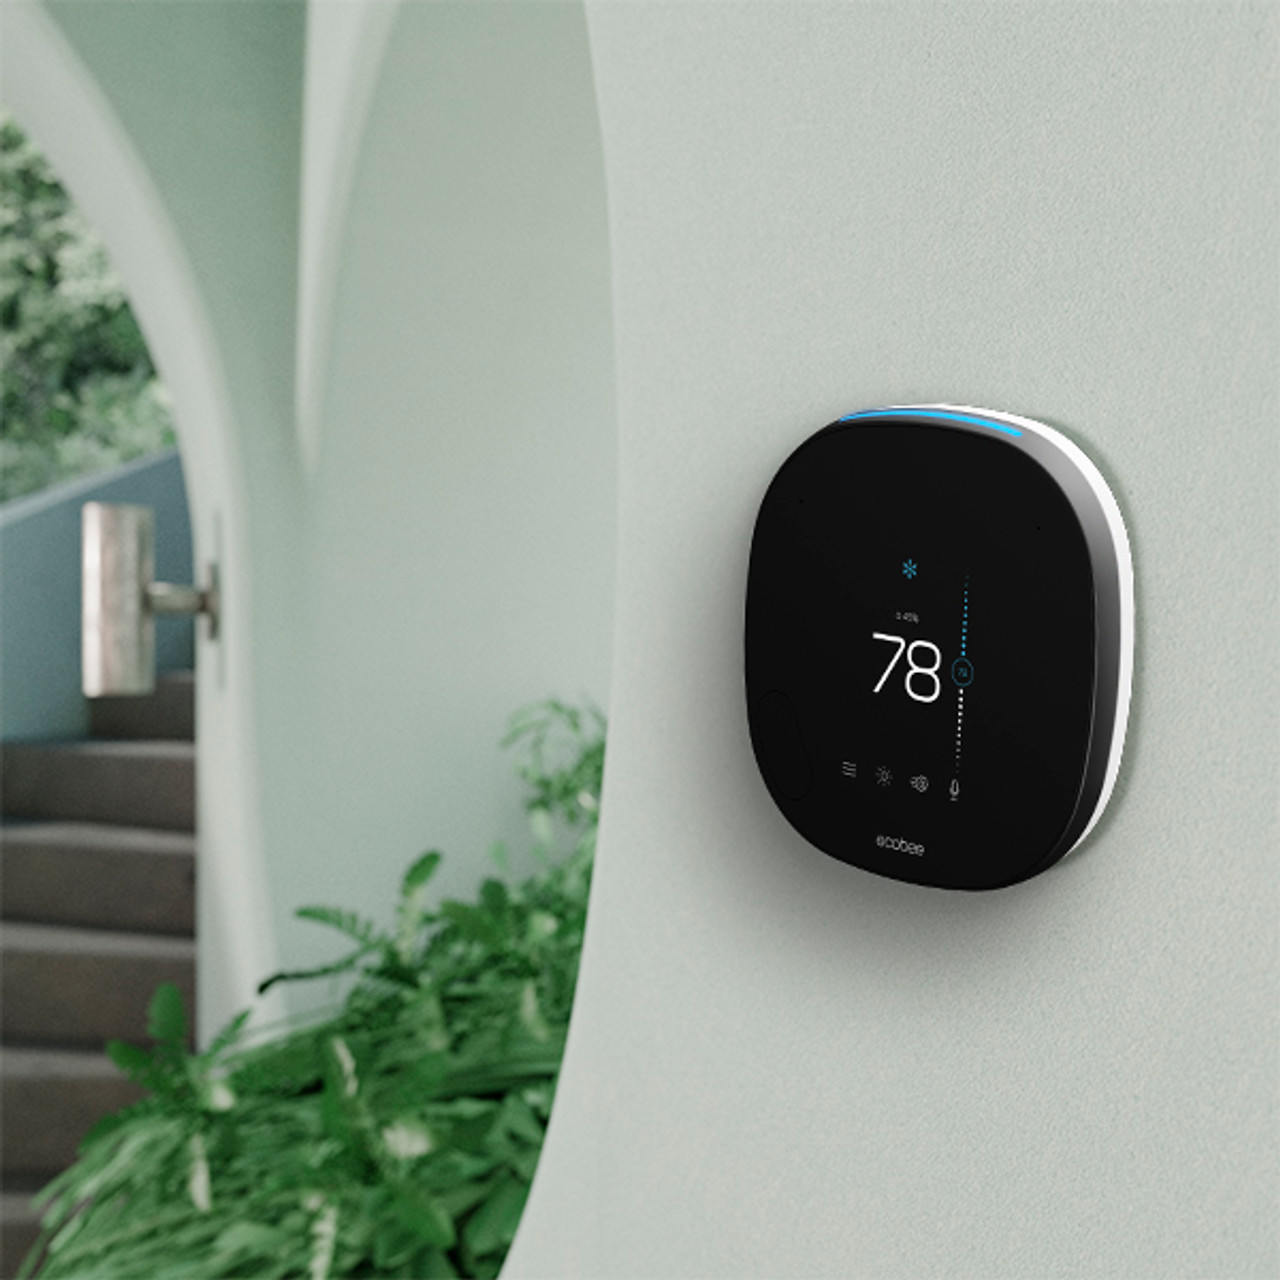 How To Install Ecobee3 Lite Smart Thermostat